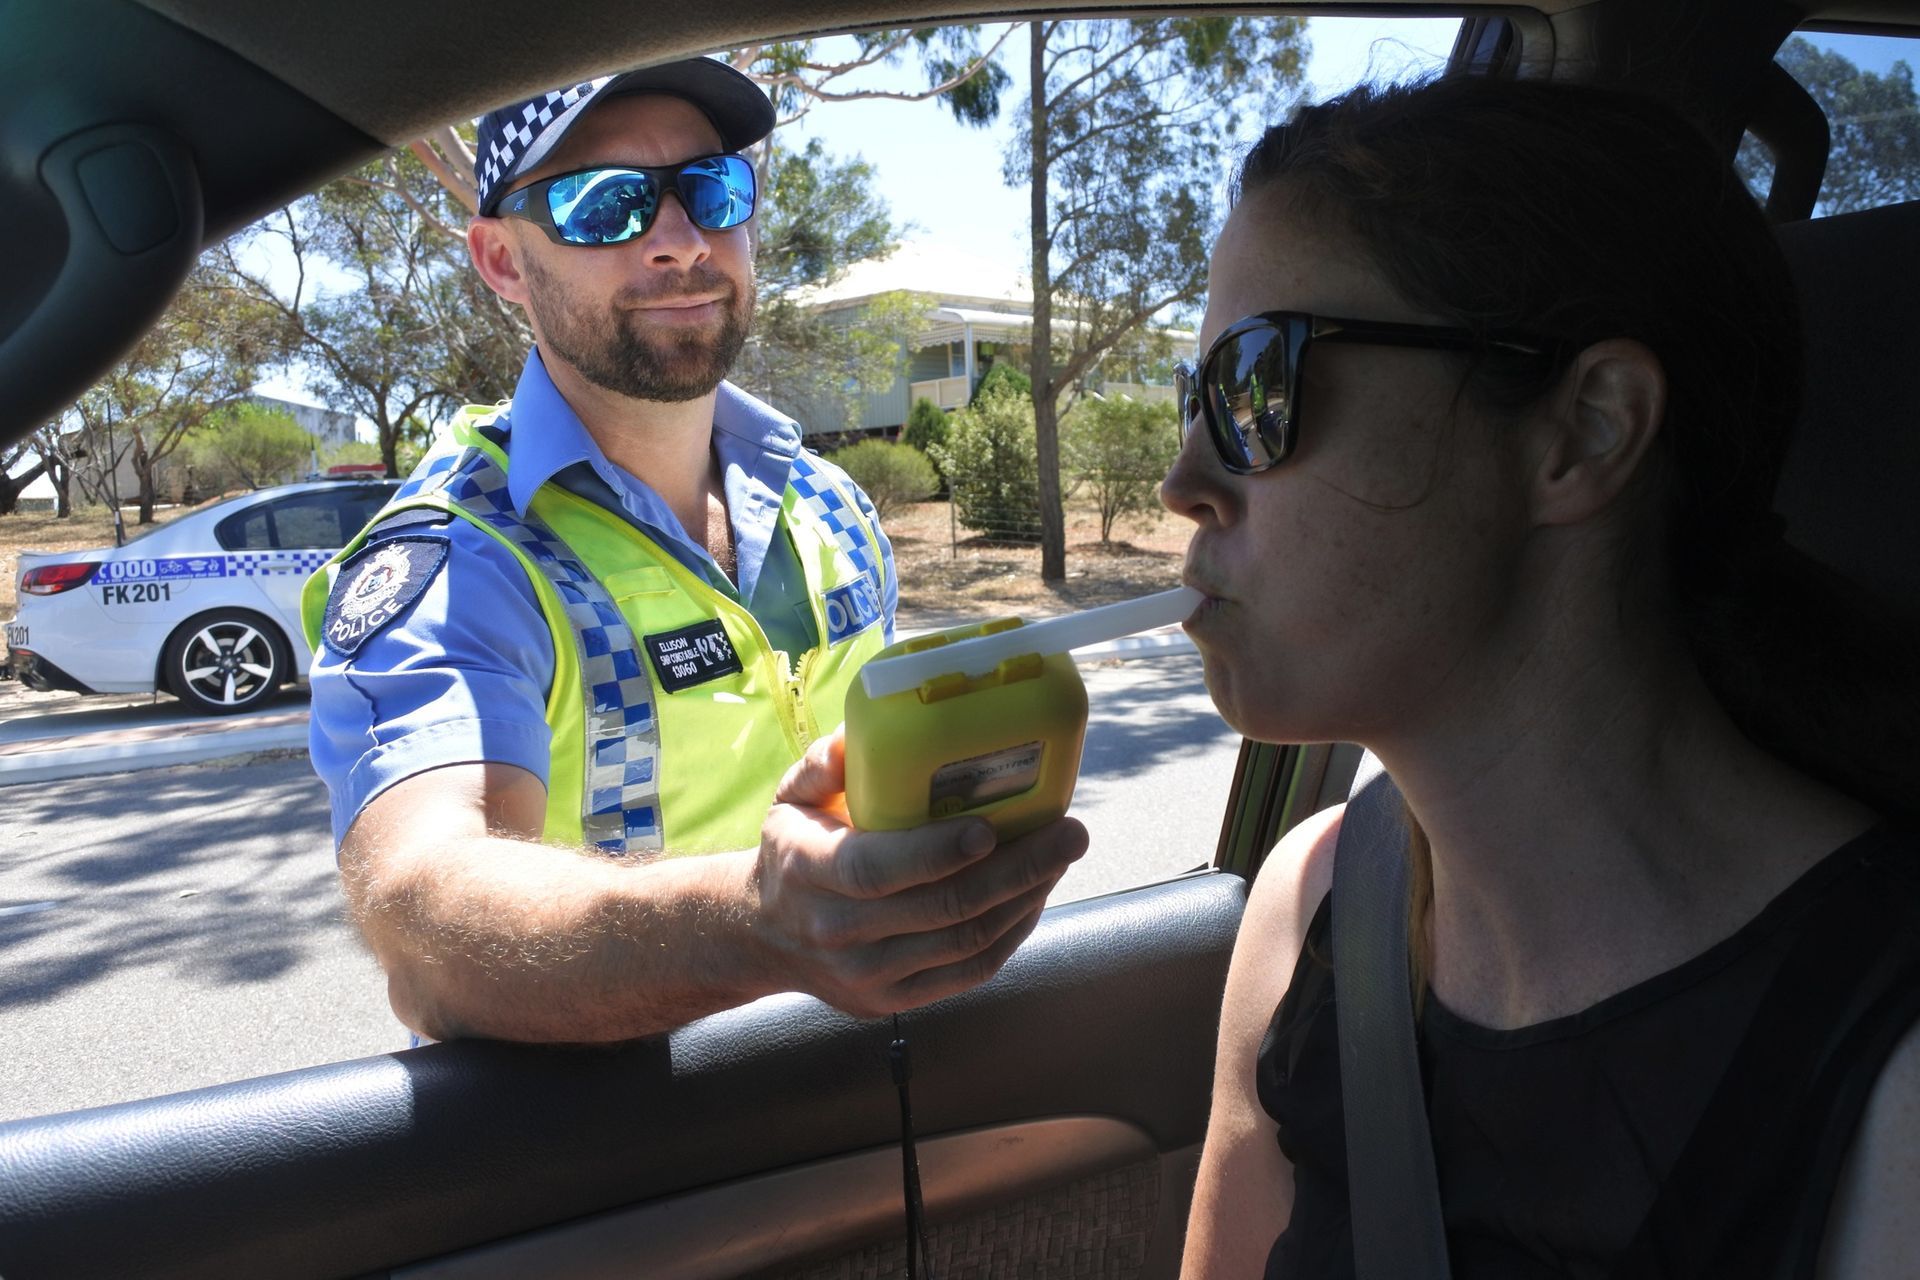 police holding a breathalyzer in front of a driver